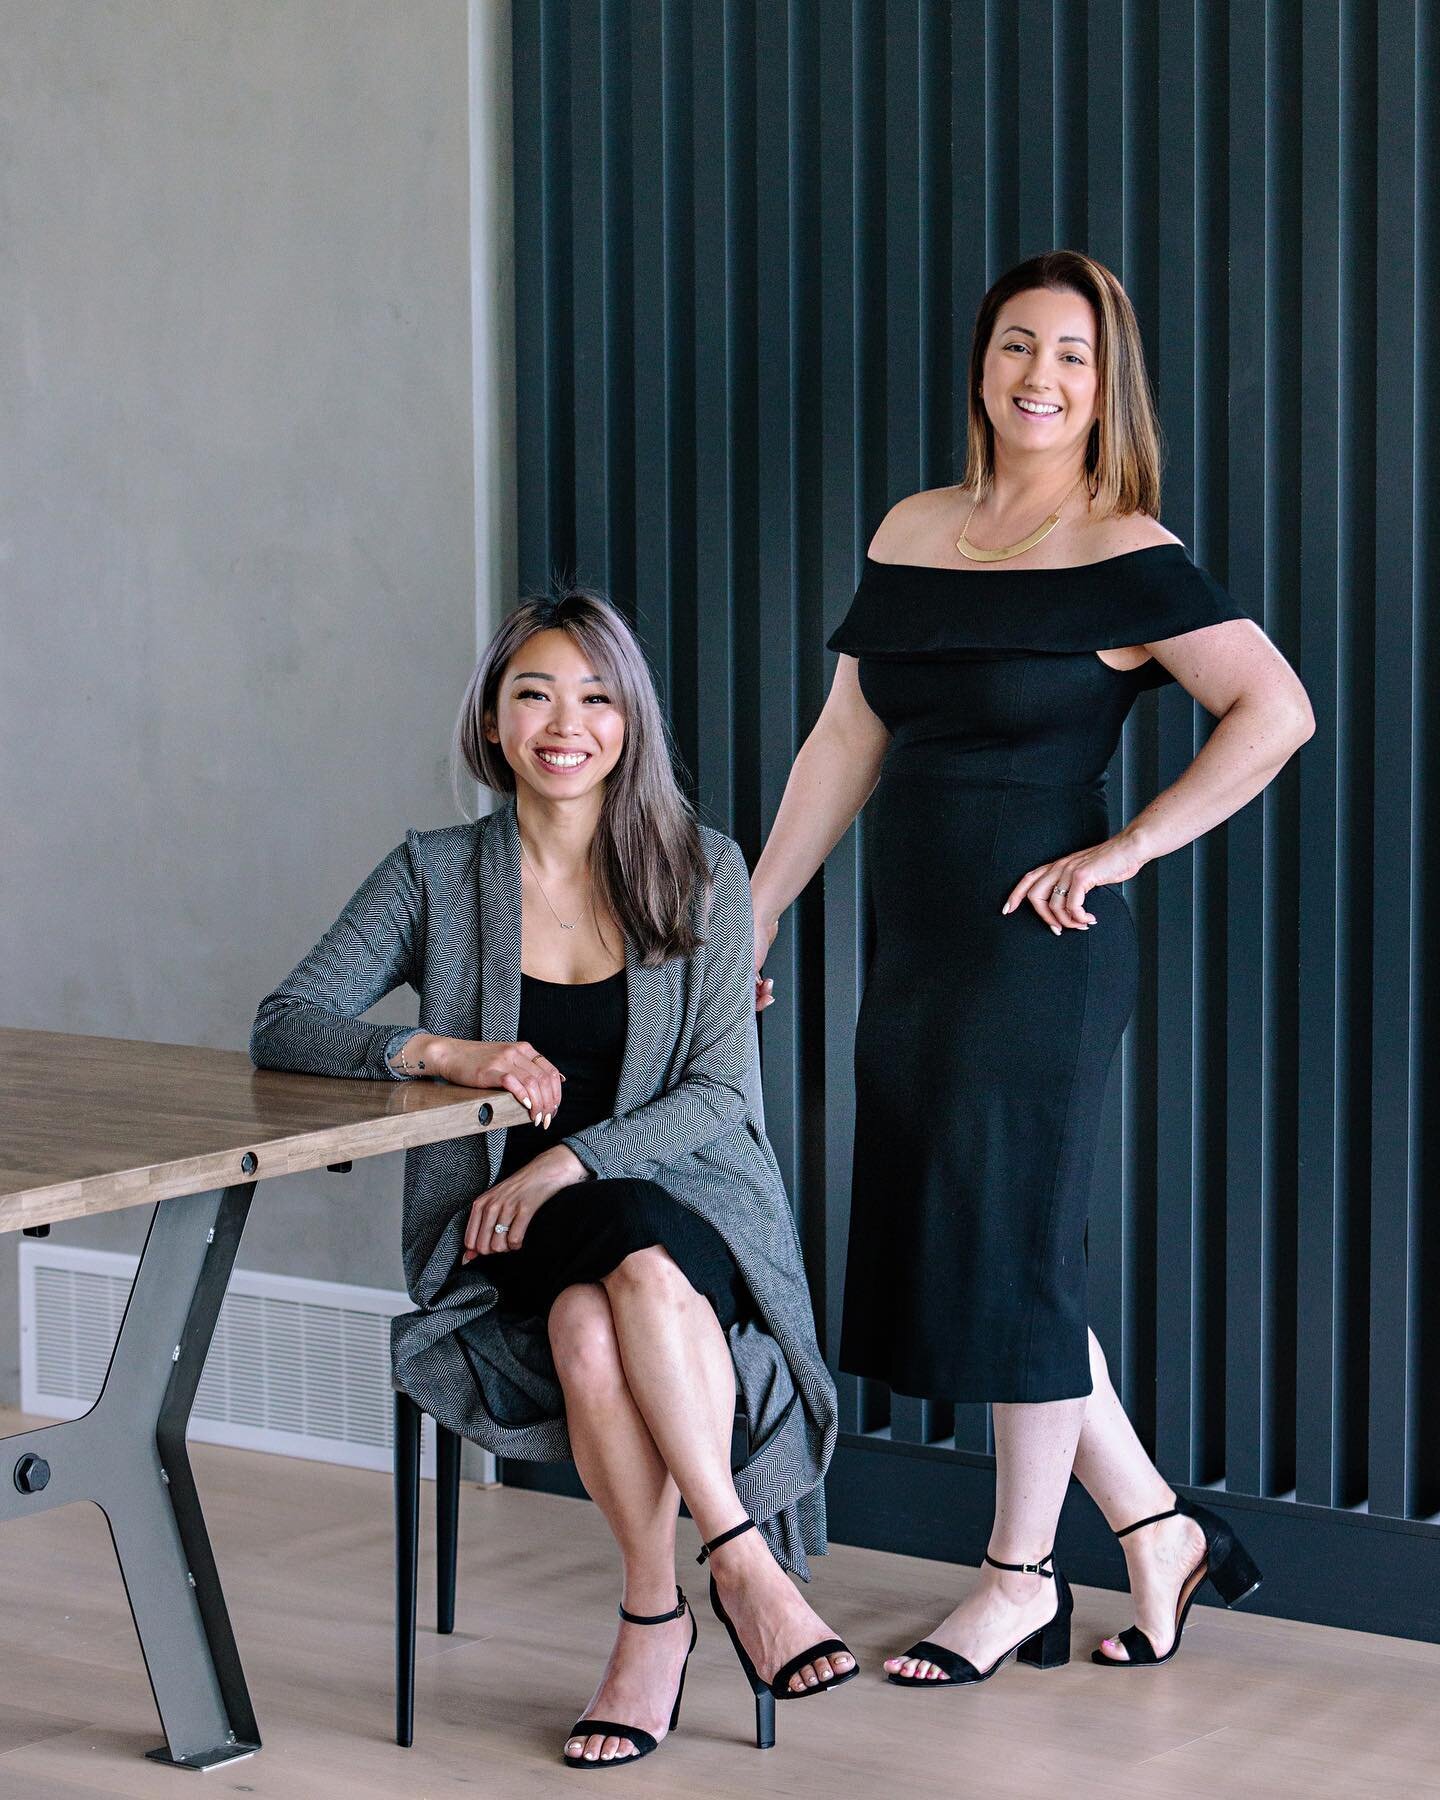 We just wanted to pop on and say 👋🏻
For those of you that are new to our page, we wanted to re-introduce ourselves. We are Danielle Molnar &amp; Augustina Hui of Accentrix Design. 
⠀⠀⠀⠀⠀⠀⠀⠀⠀
Accentrix Design was founded in 2009 by Danielle, our Lea